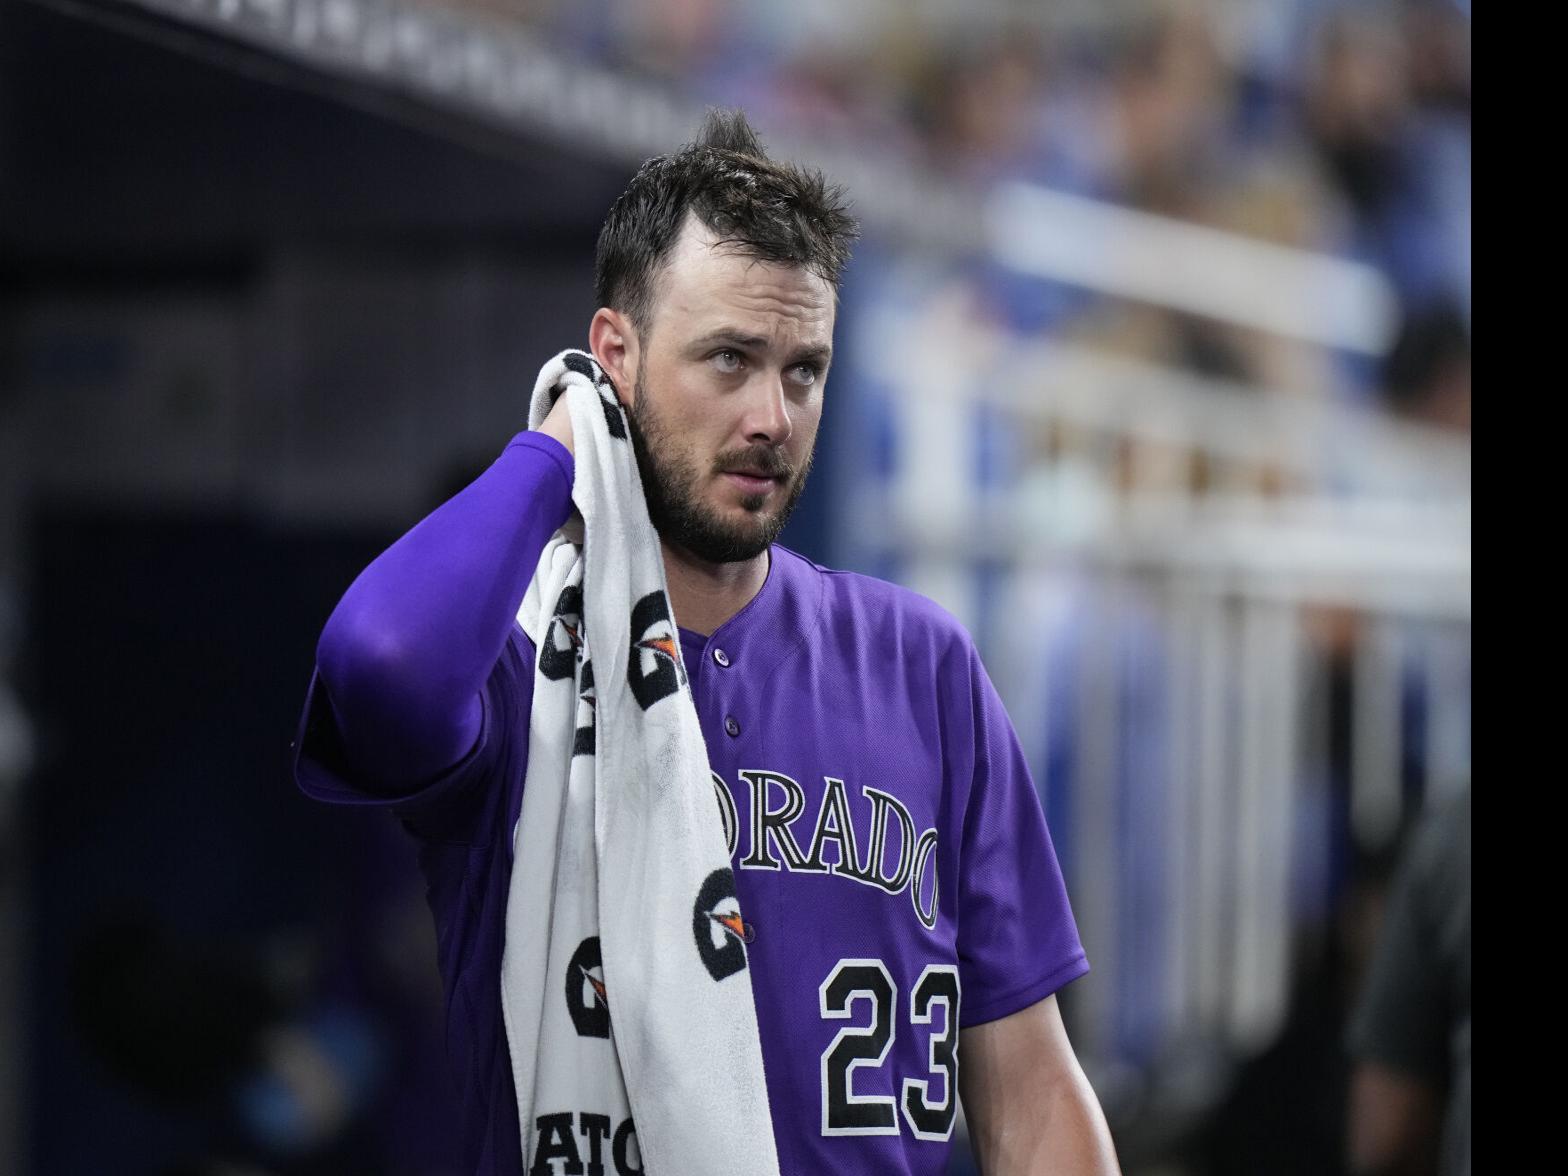 Eyeing the Tigers: Kris Bryant returns to Colorado Rockies after injury for  series vs. Detroit